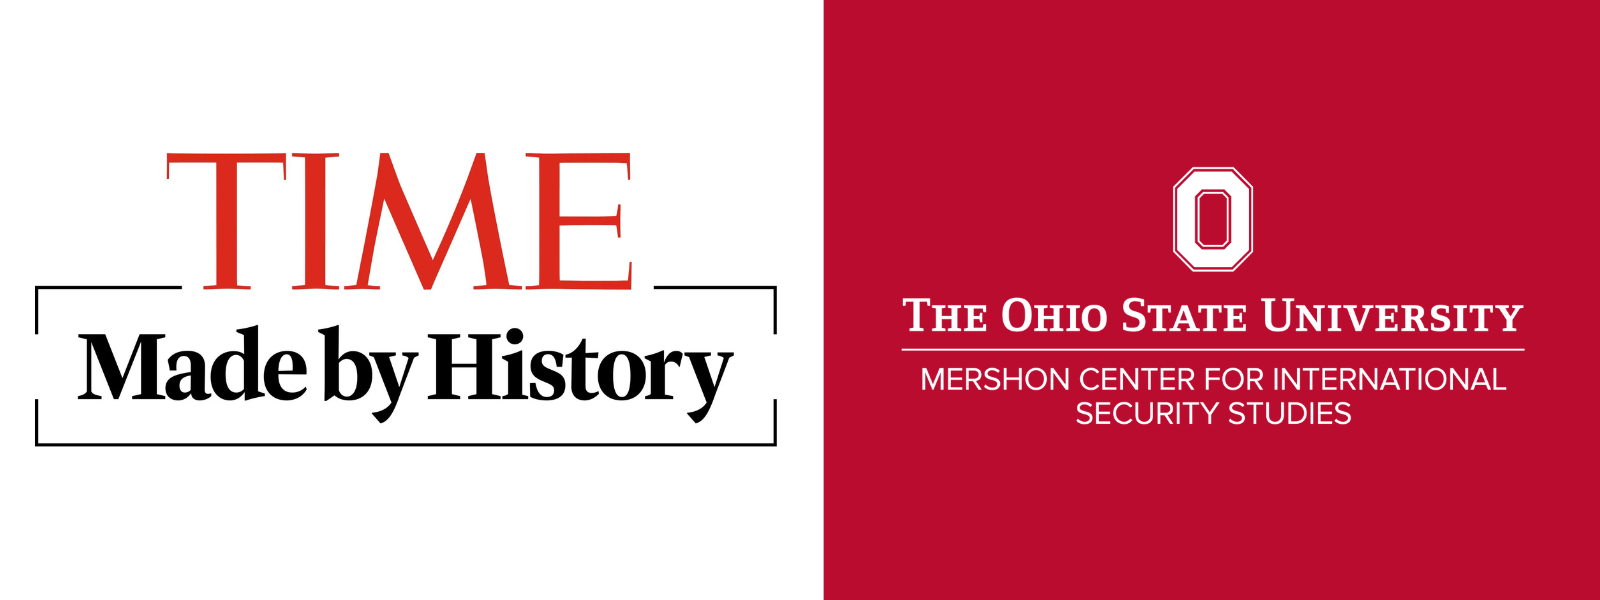 Made by History and the Mershon Center logo